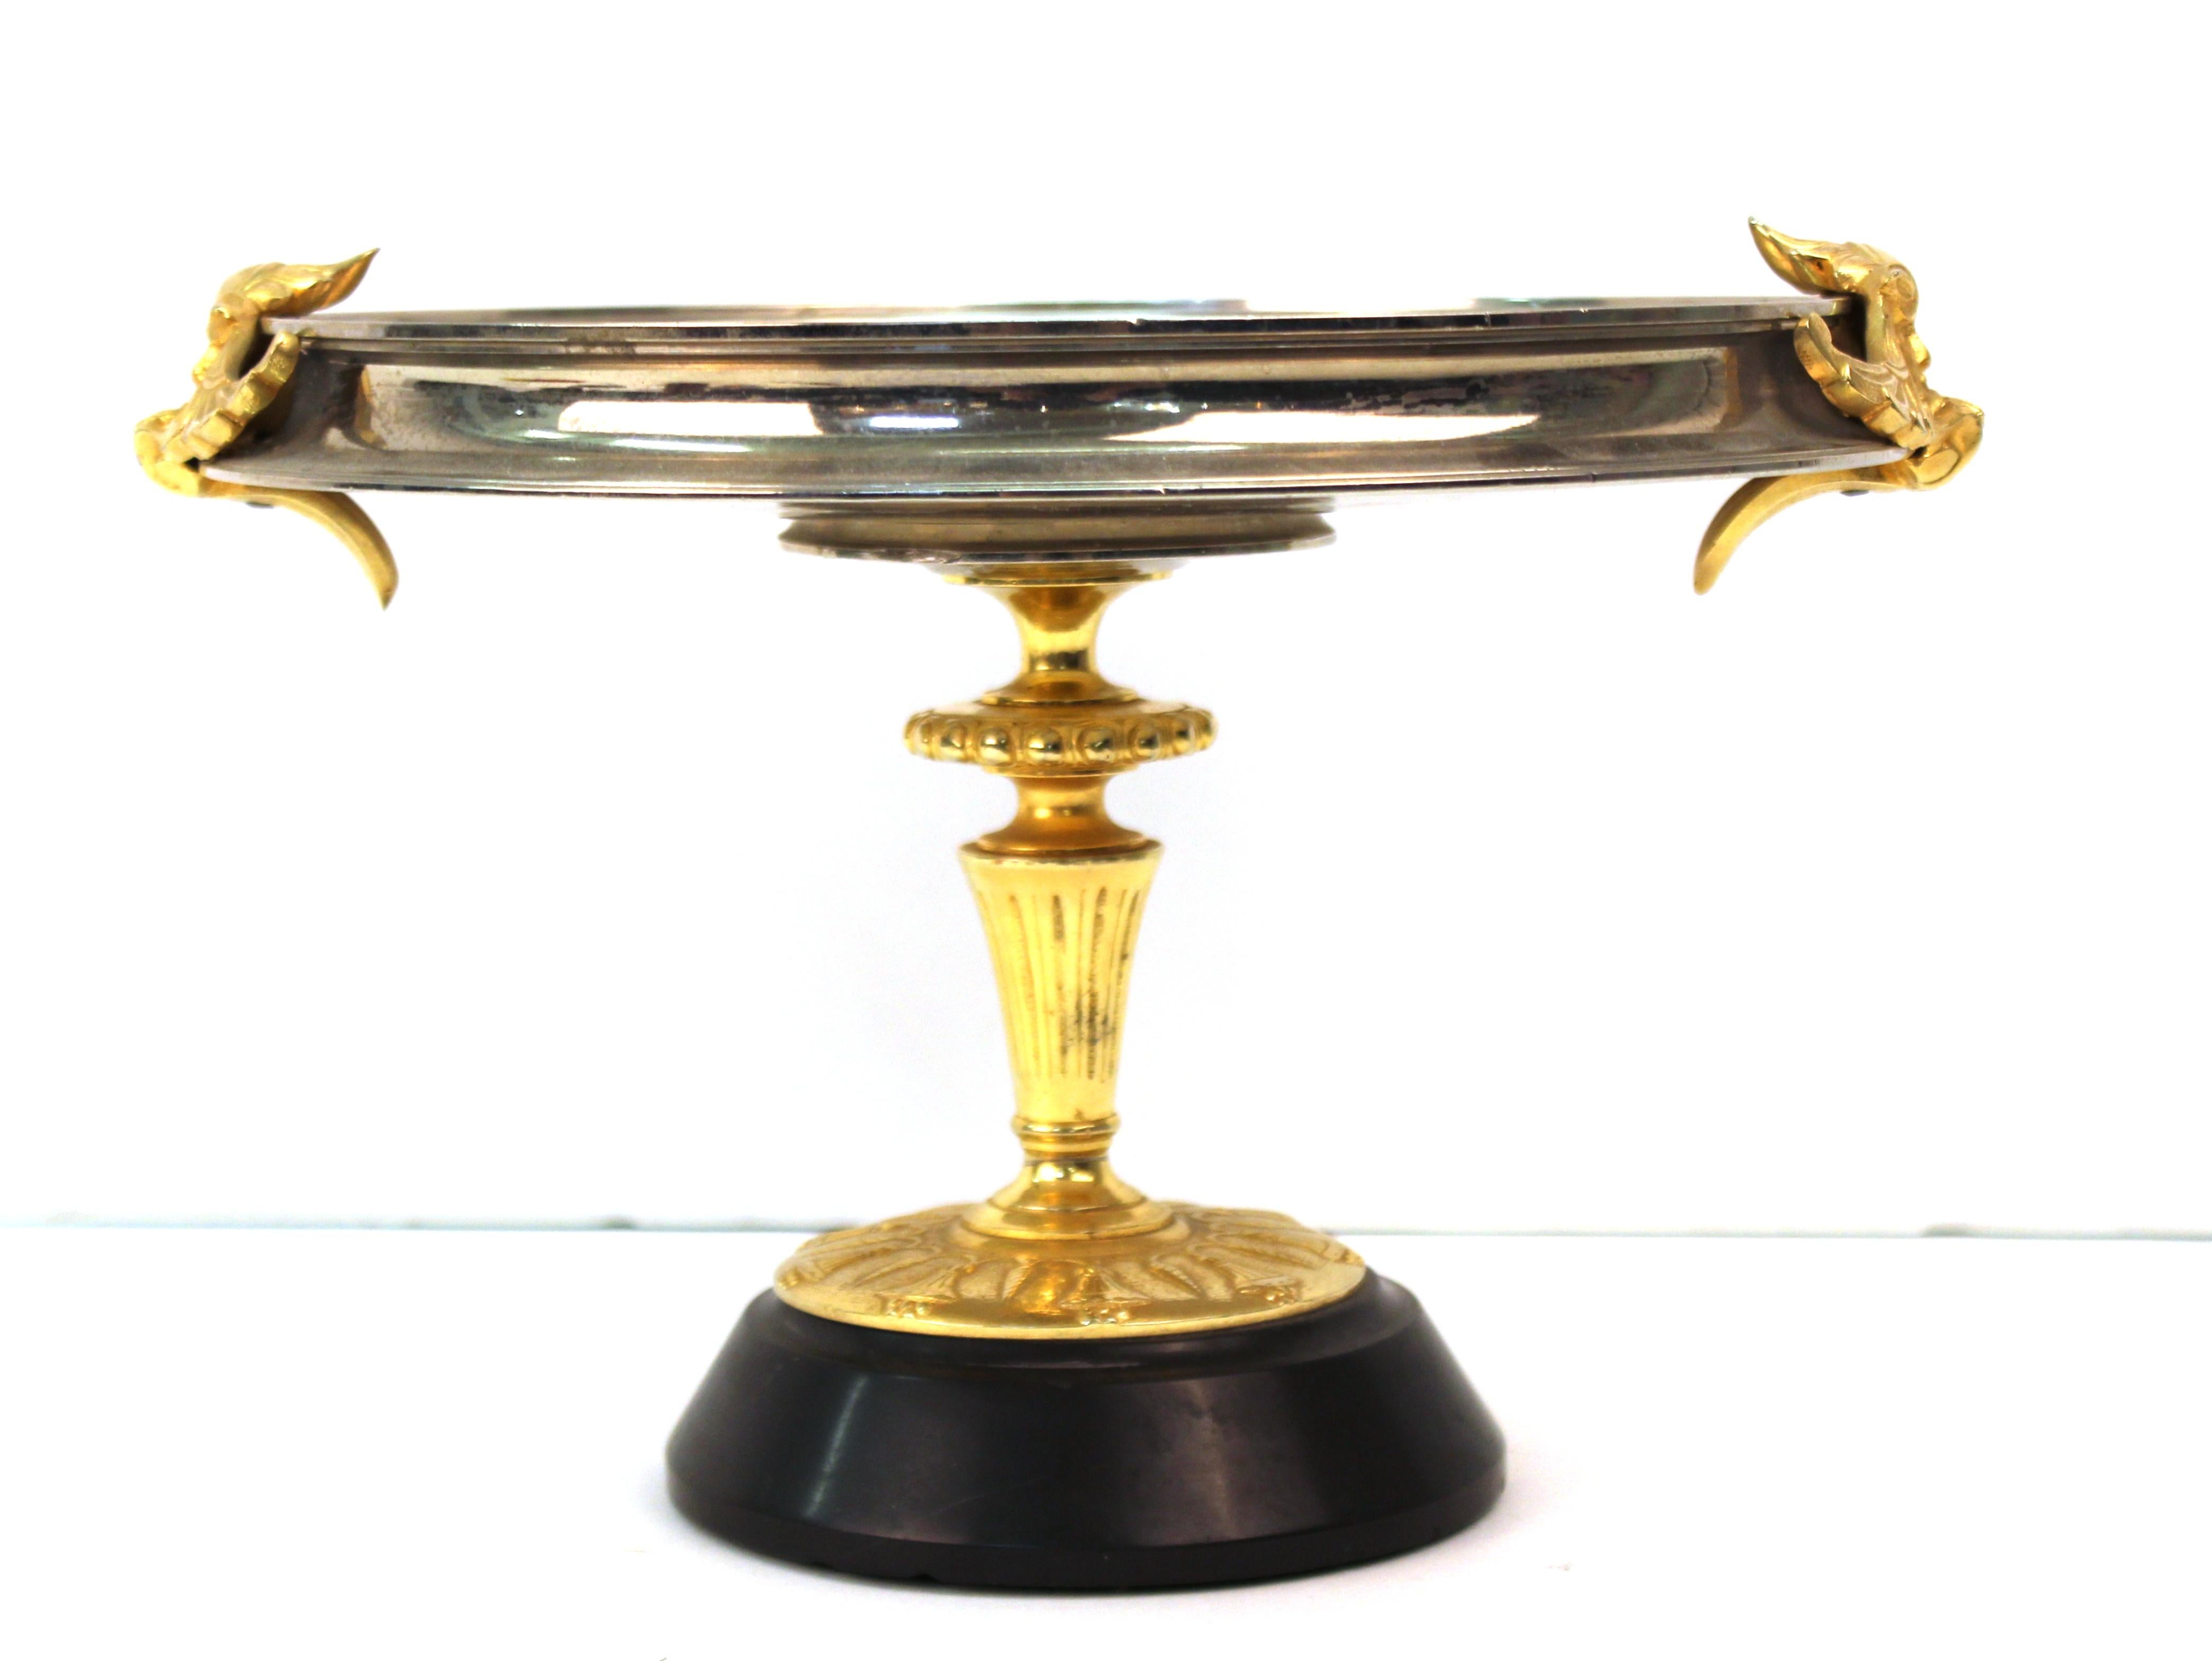 Continental Grand Tour tazza in Neoclassical Revival style, with a decorative central medallion featuring a nymph with a cherub. The plate has satyr head handles and is mounted on a gilt base with Neo-Egyptian base. In great vintage condition with